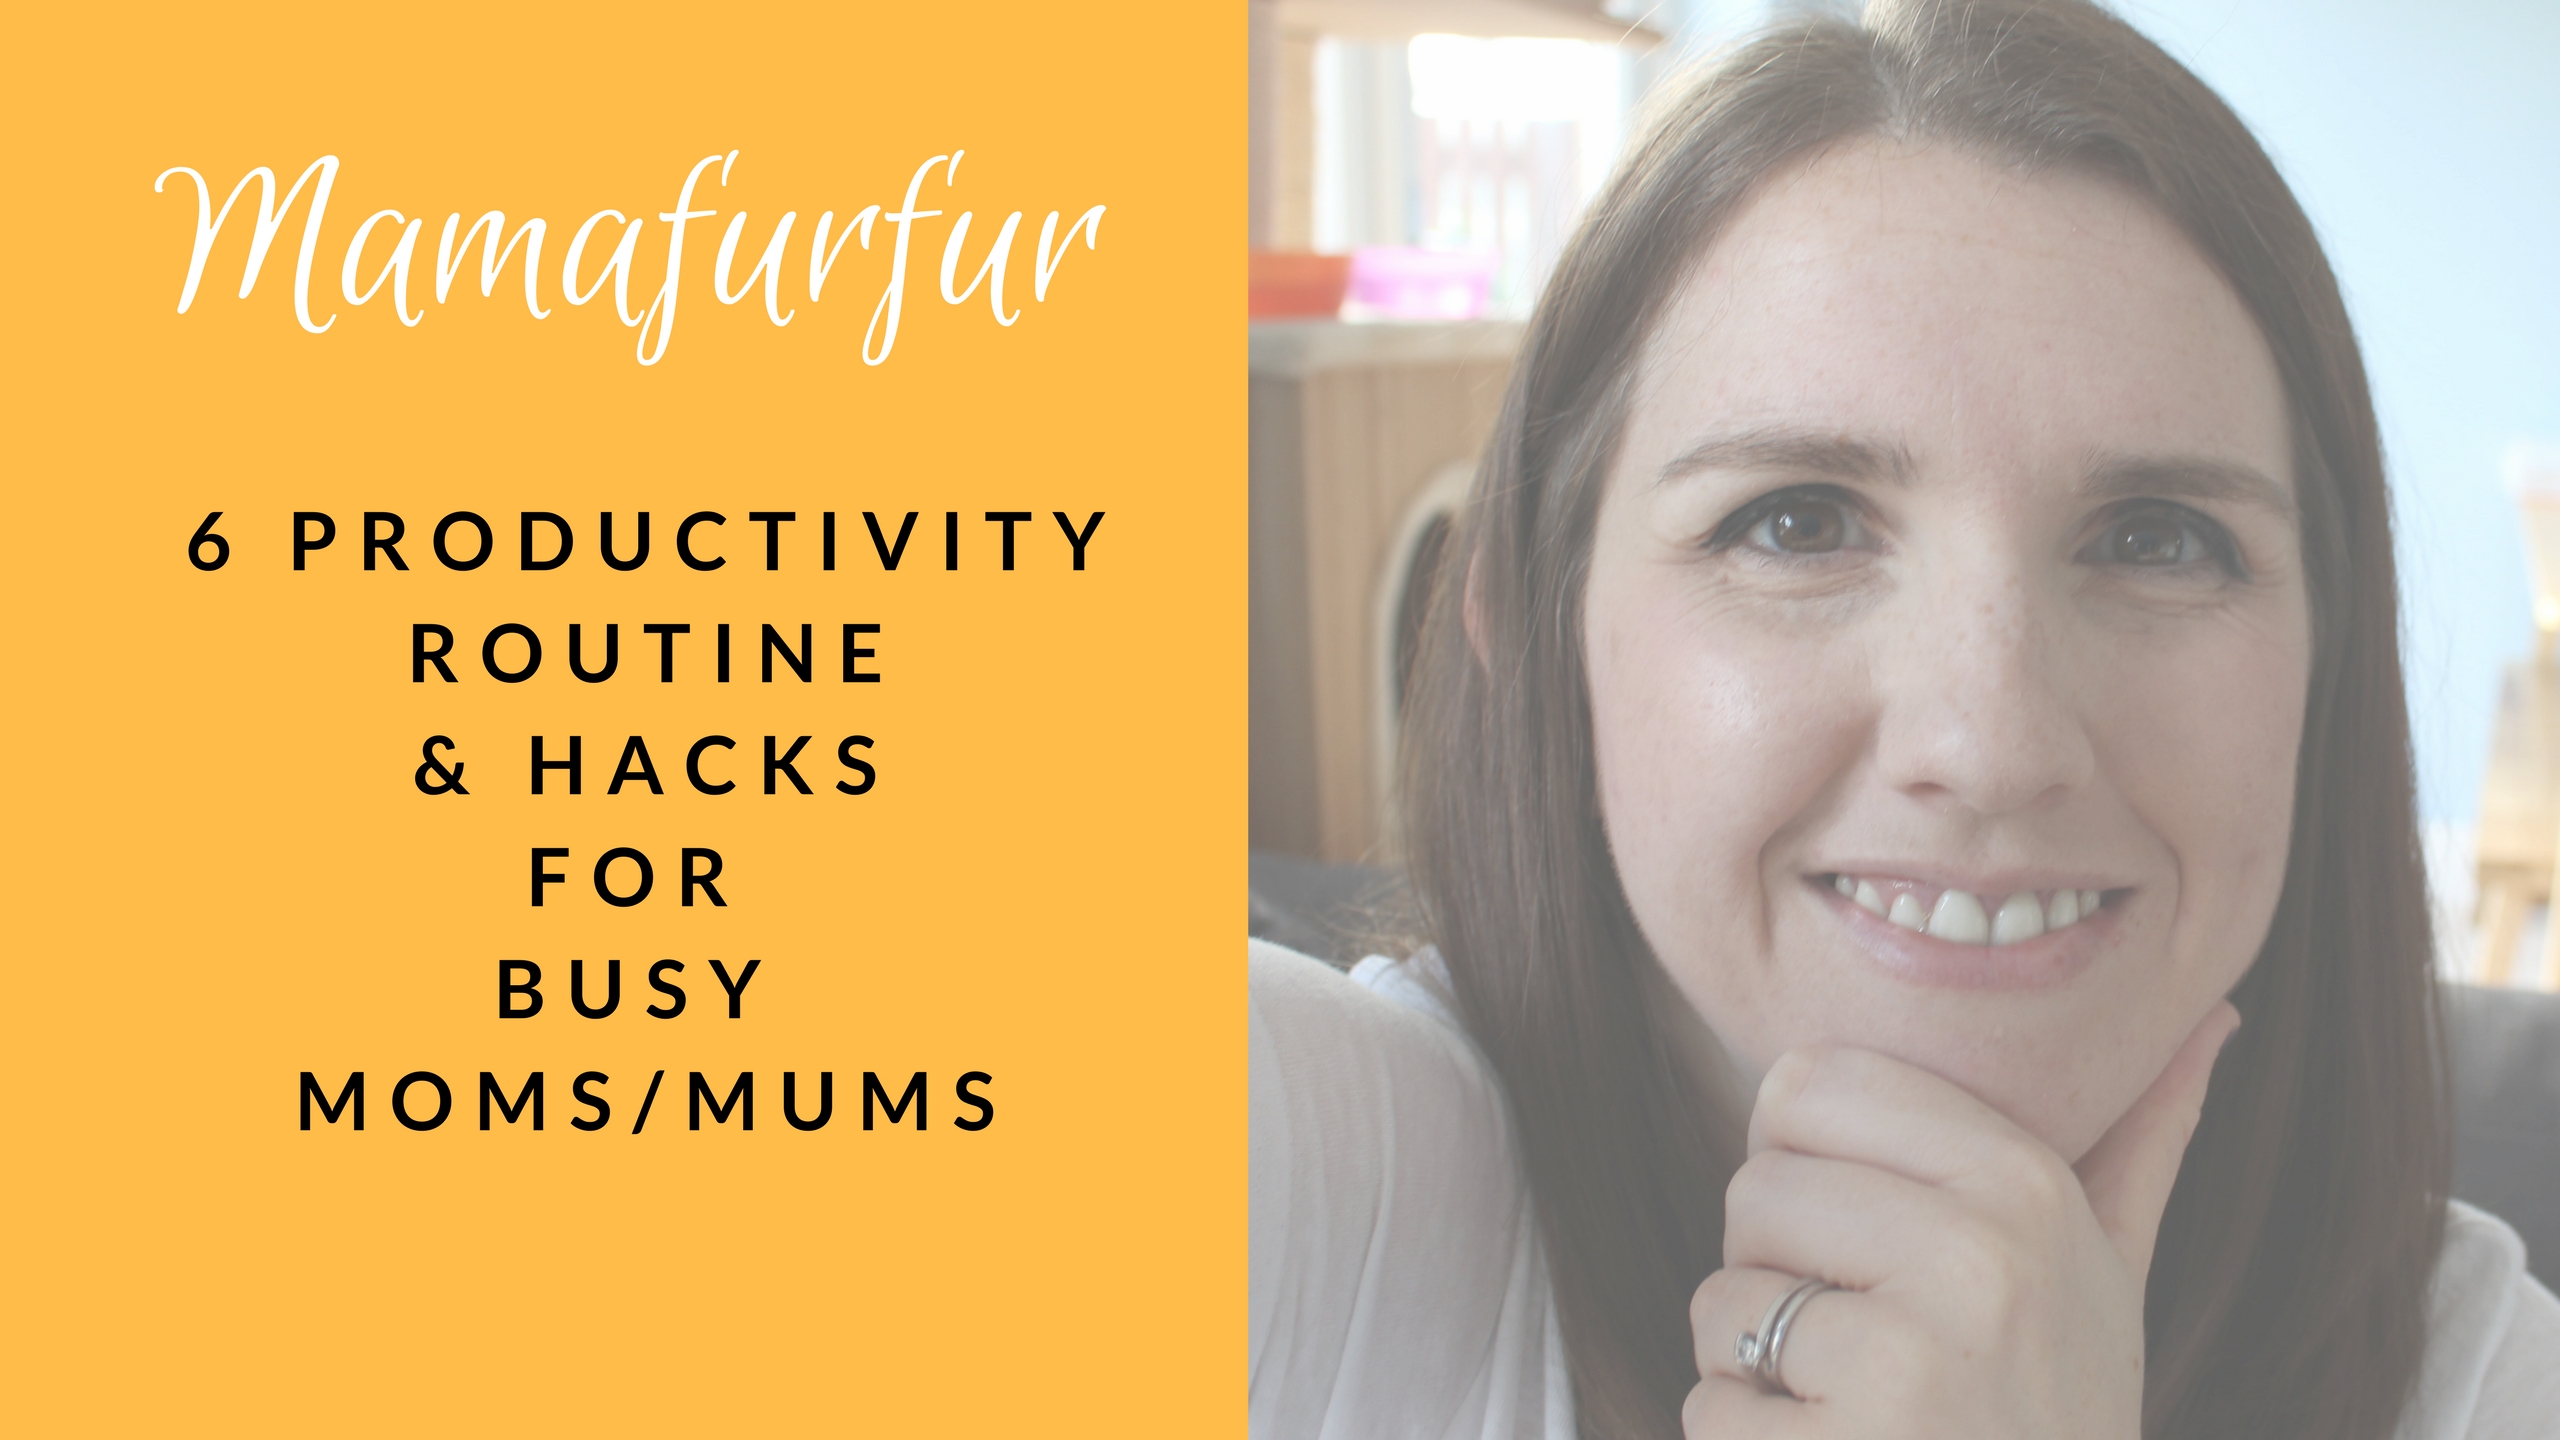 6 Productivity Routine & Hacks for Busy Mums ¦ How to be productive - Mamafurfur Youtube Channel